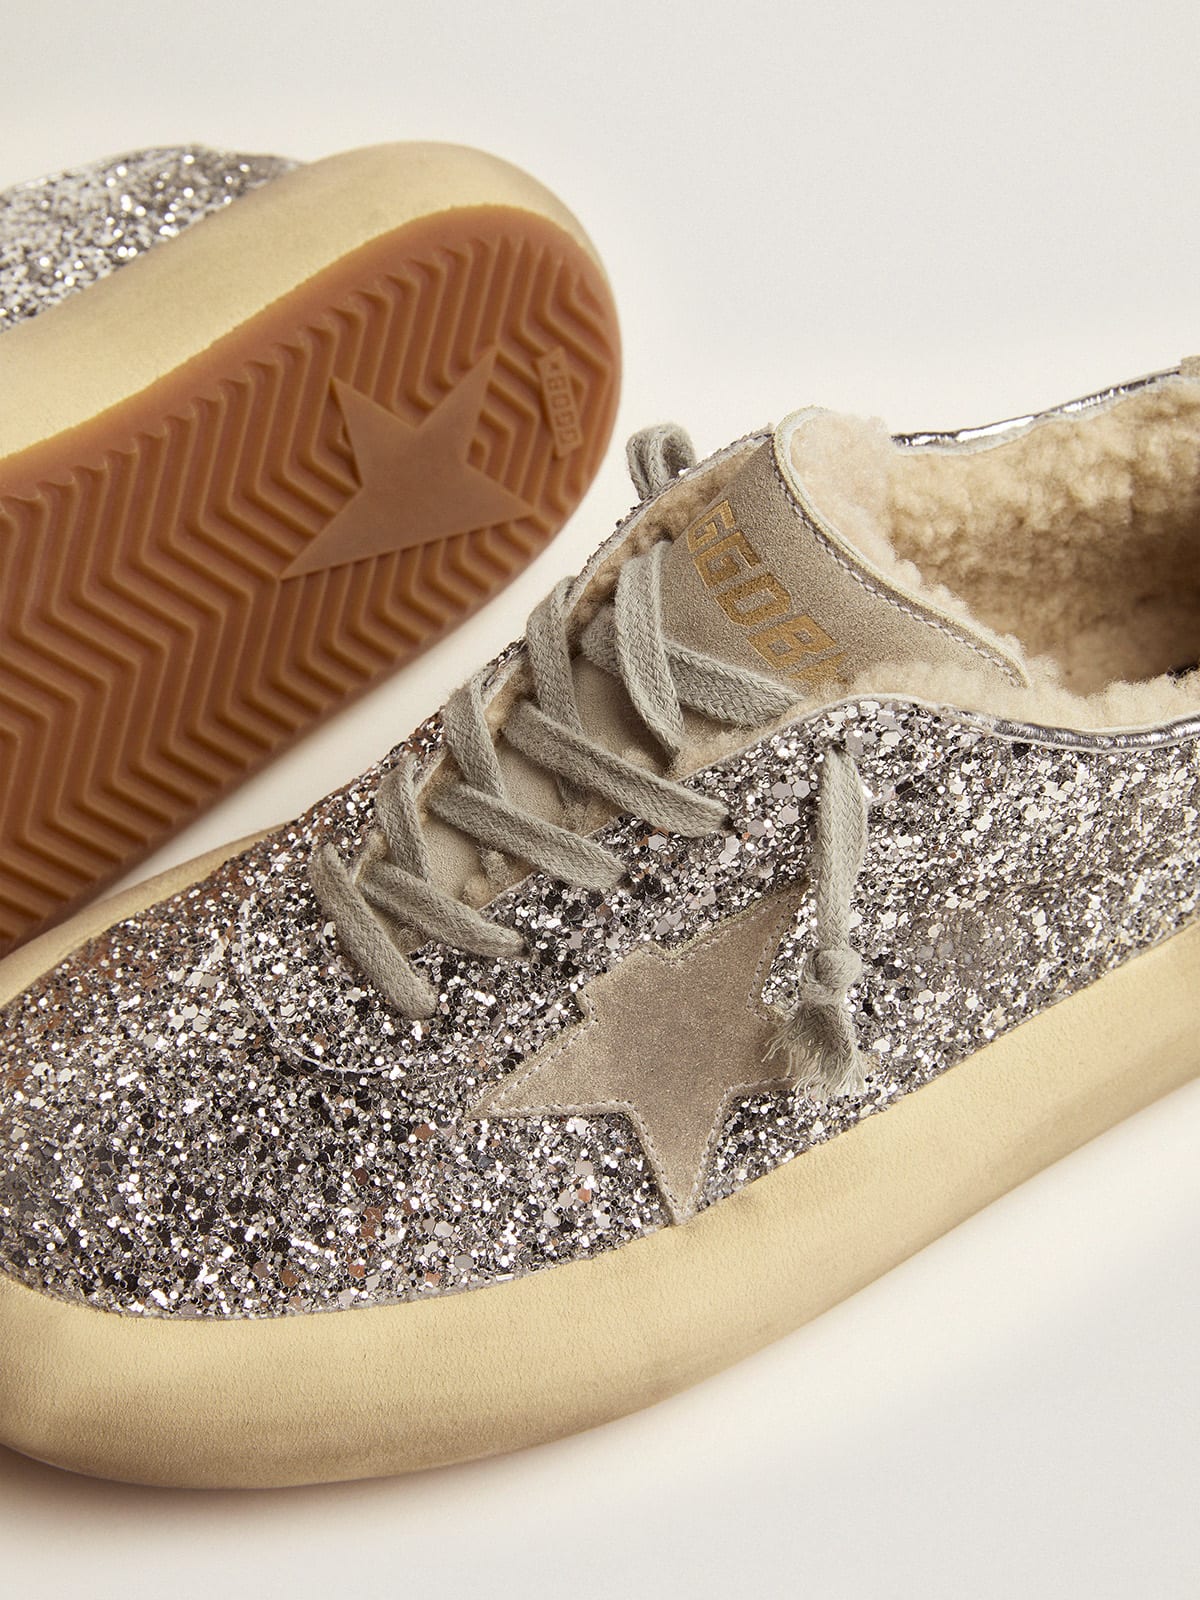 Golden Goose - Women's Space-Star shoes in silver glitter with shearling lining in 